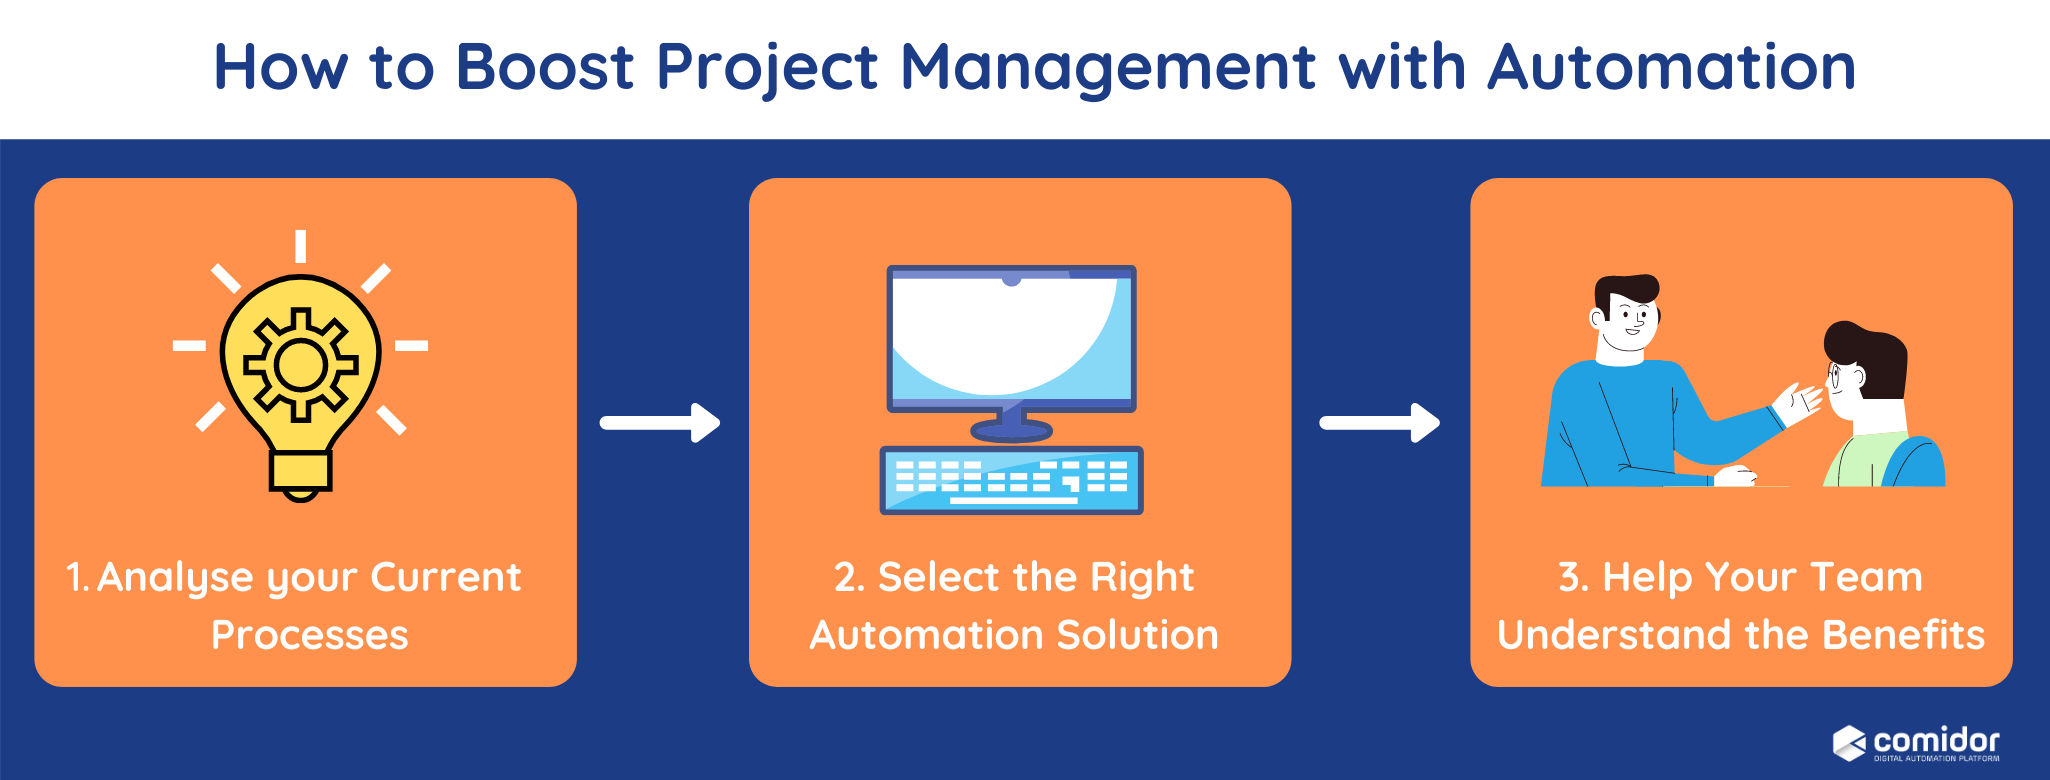 How to boost Project management with Automation | Comidor